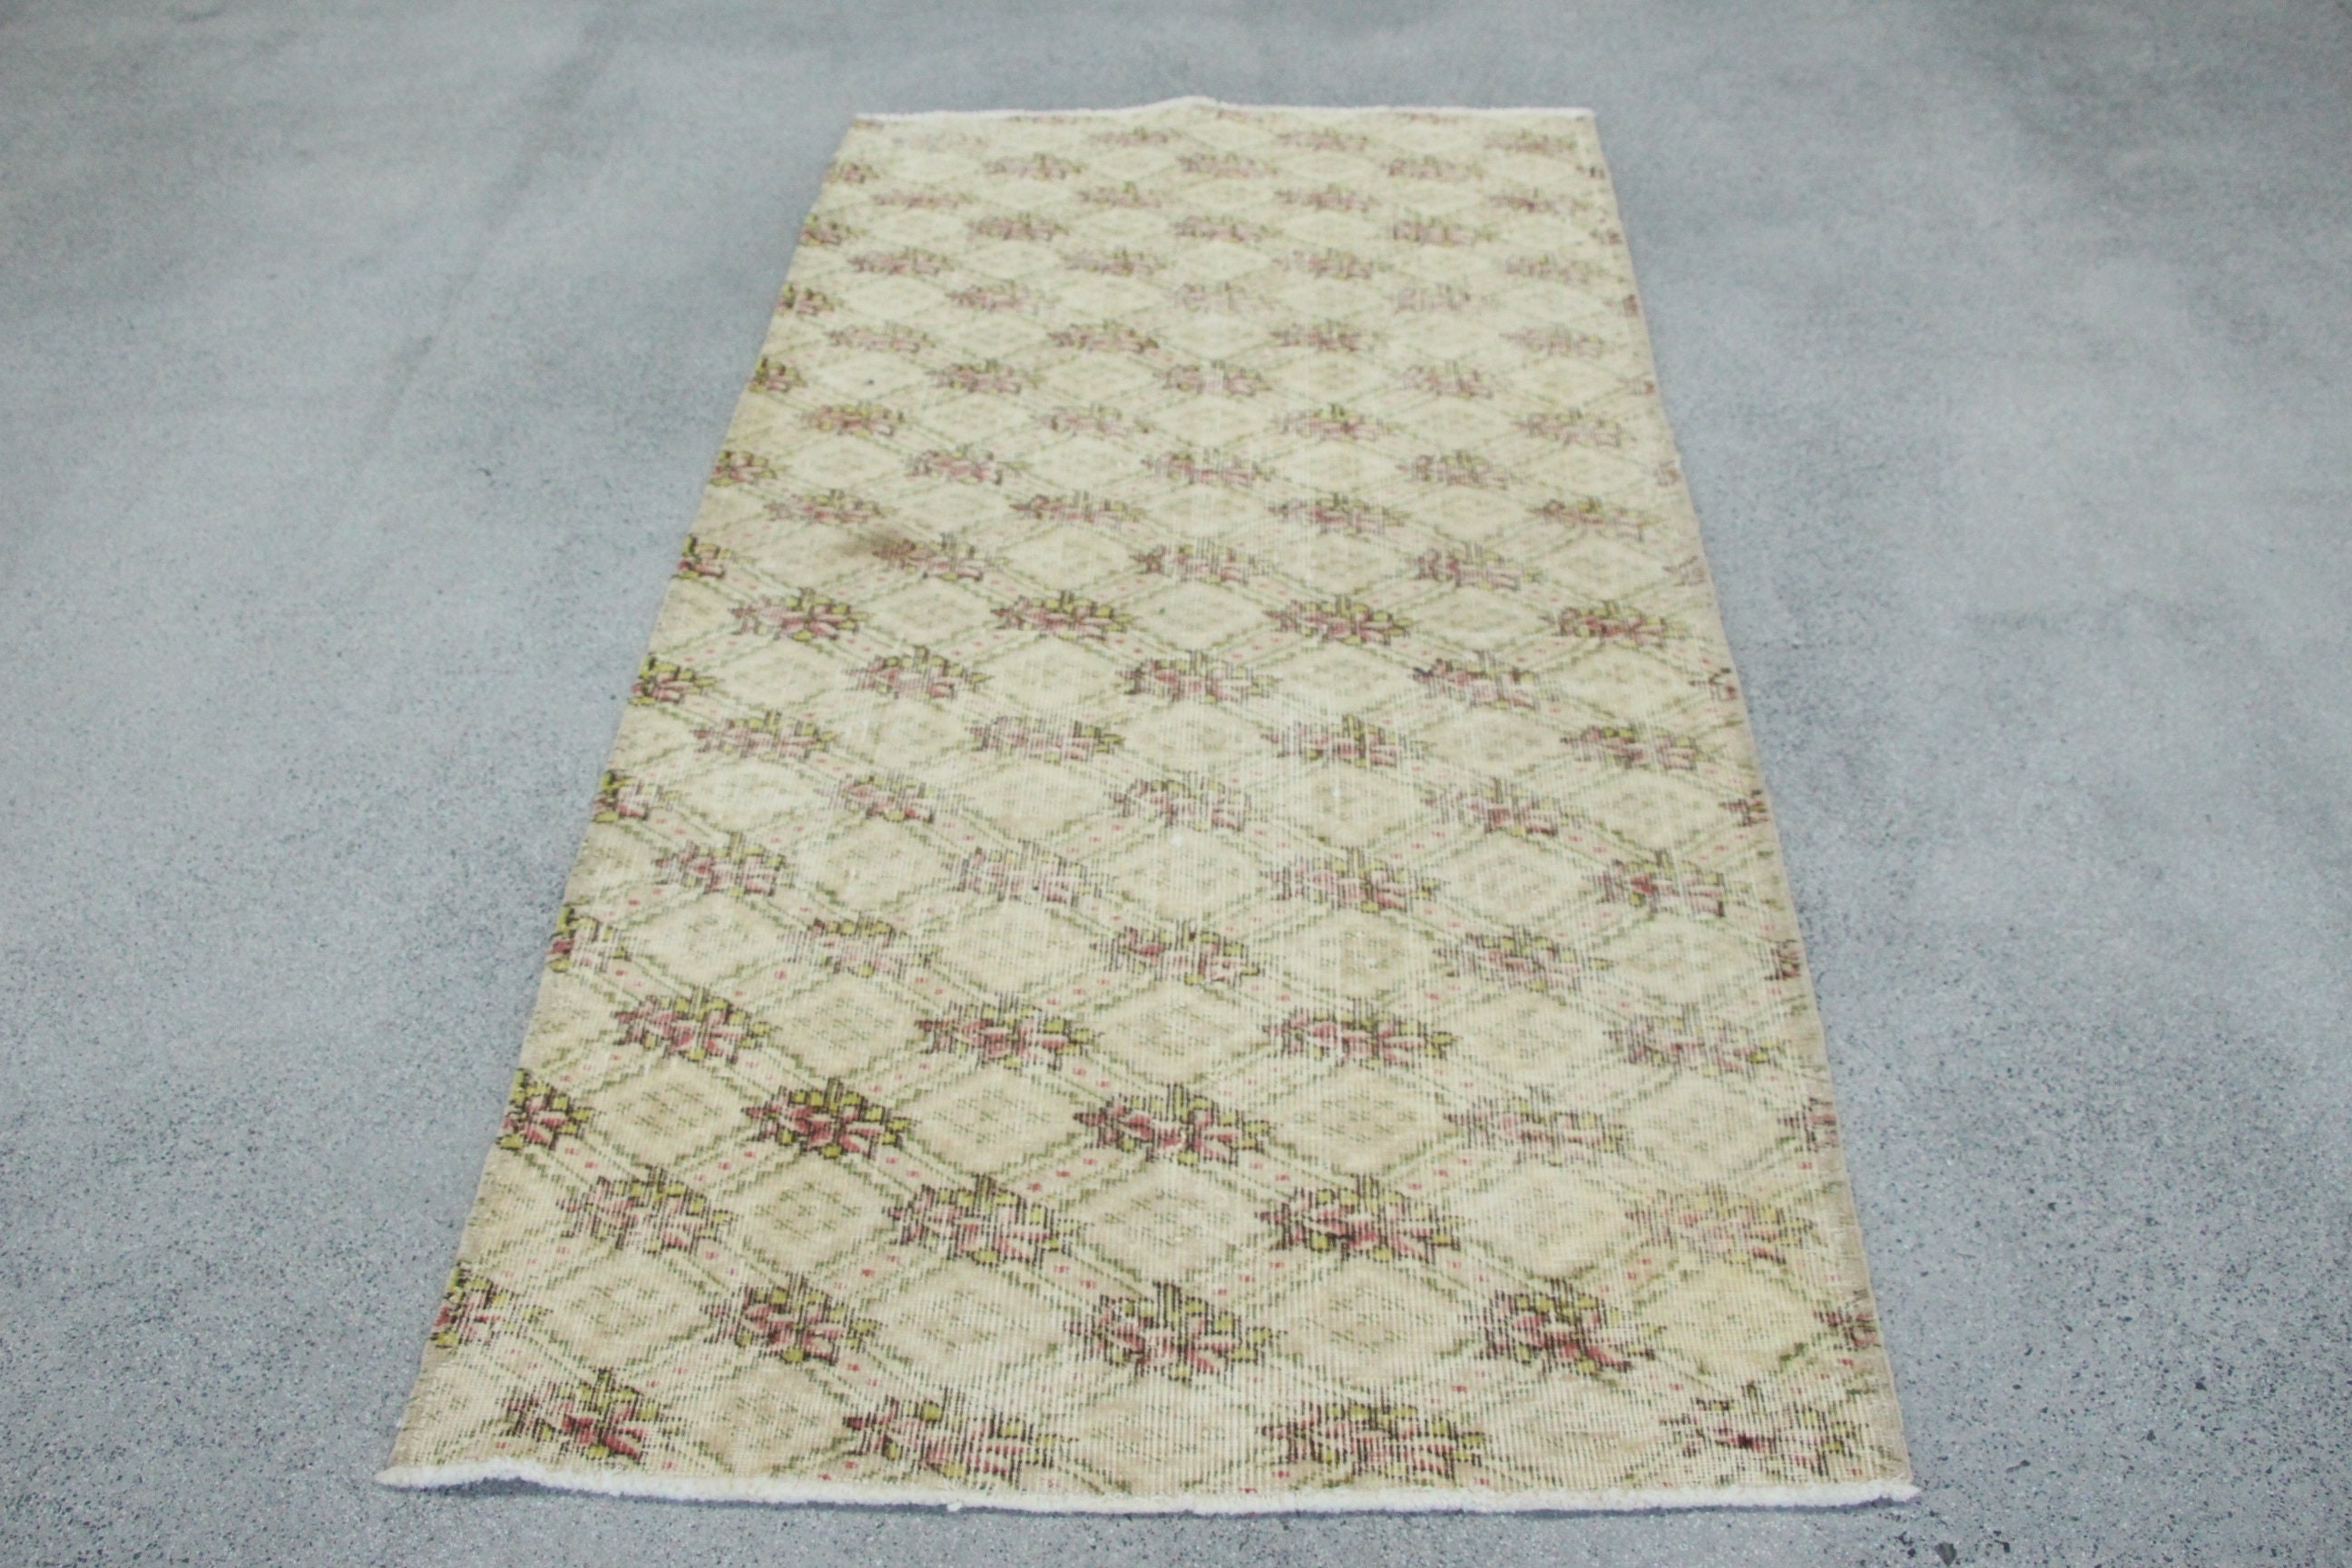 Rugs for Entry, Beige Wool Rug, Vintage Rug, Kitchen Rug, 3.3x6.6 ft Accent Rug, Bedroom Rugs, Moroccan Rug, Home Decor Rug, Turkish Rugs